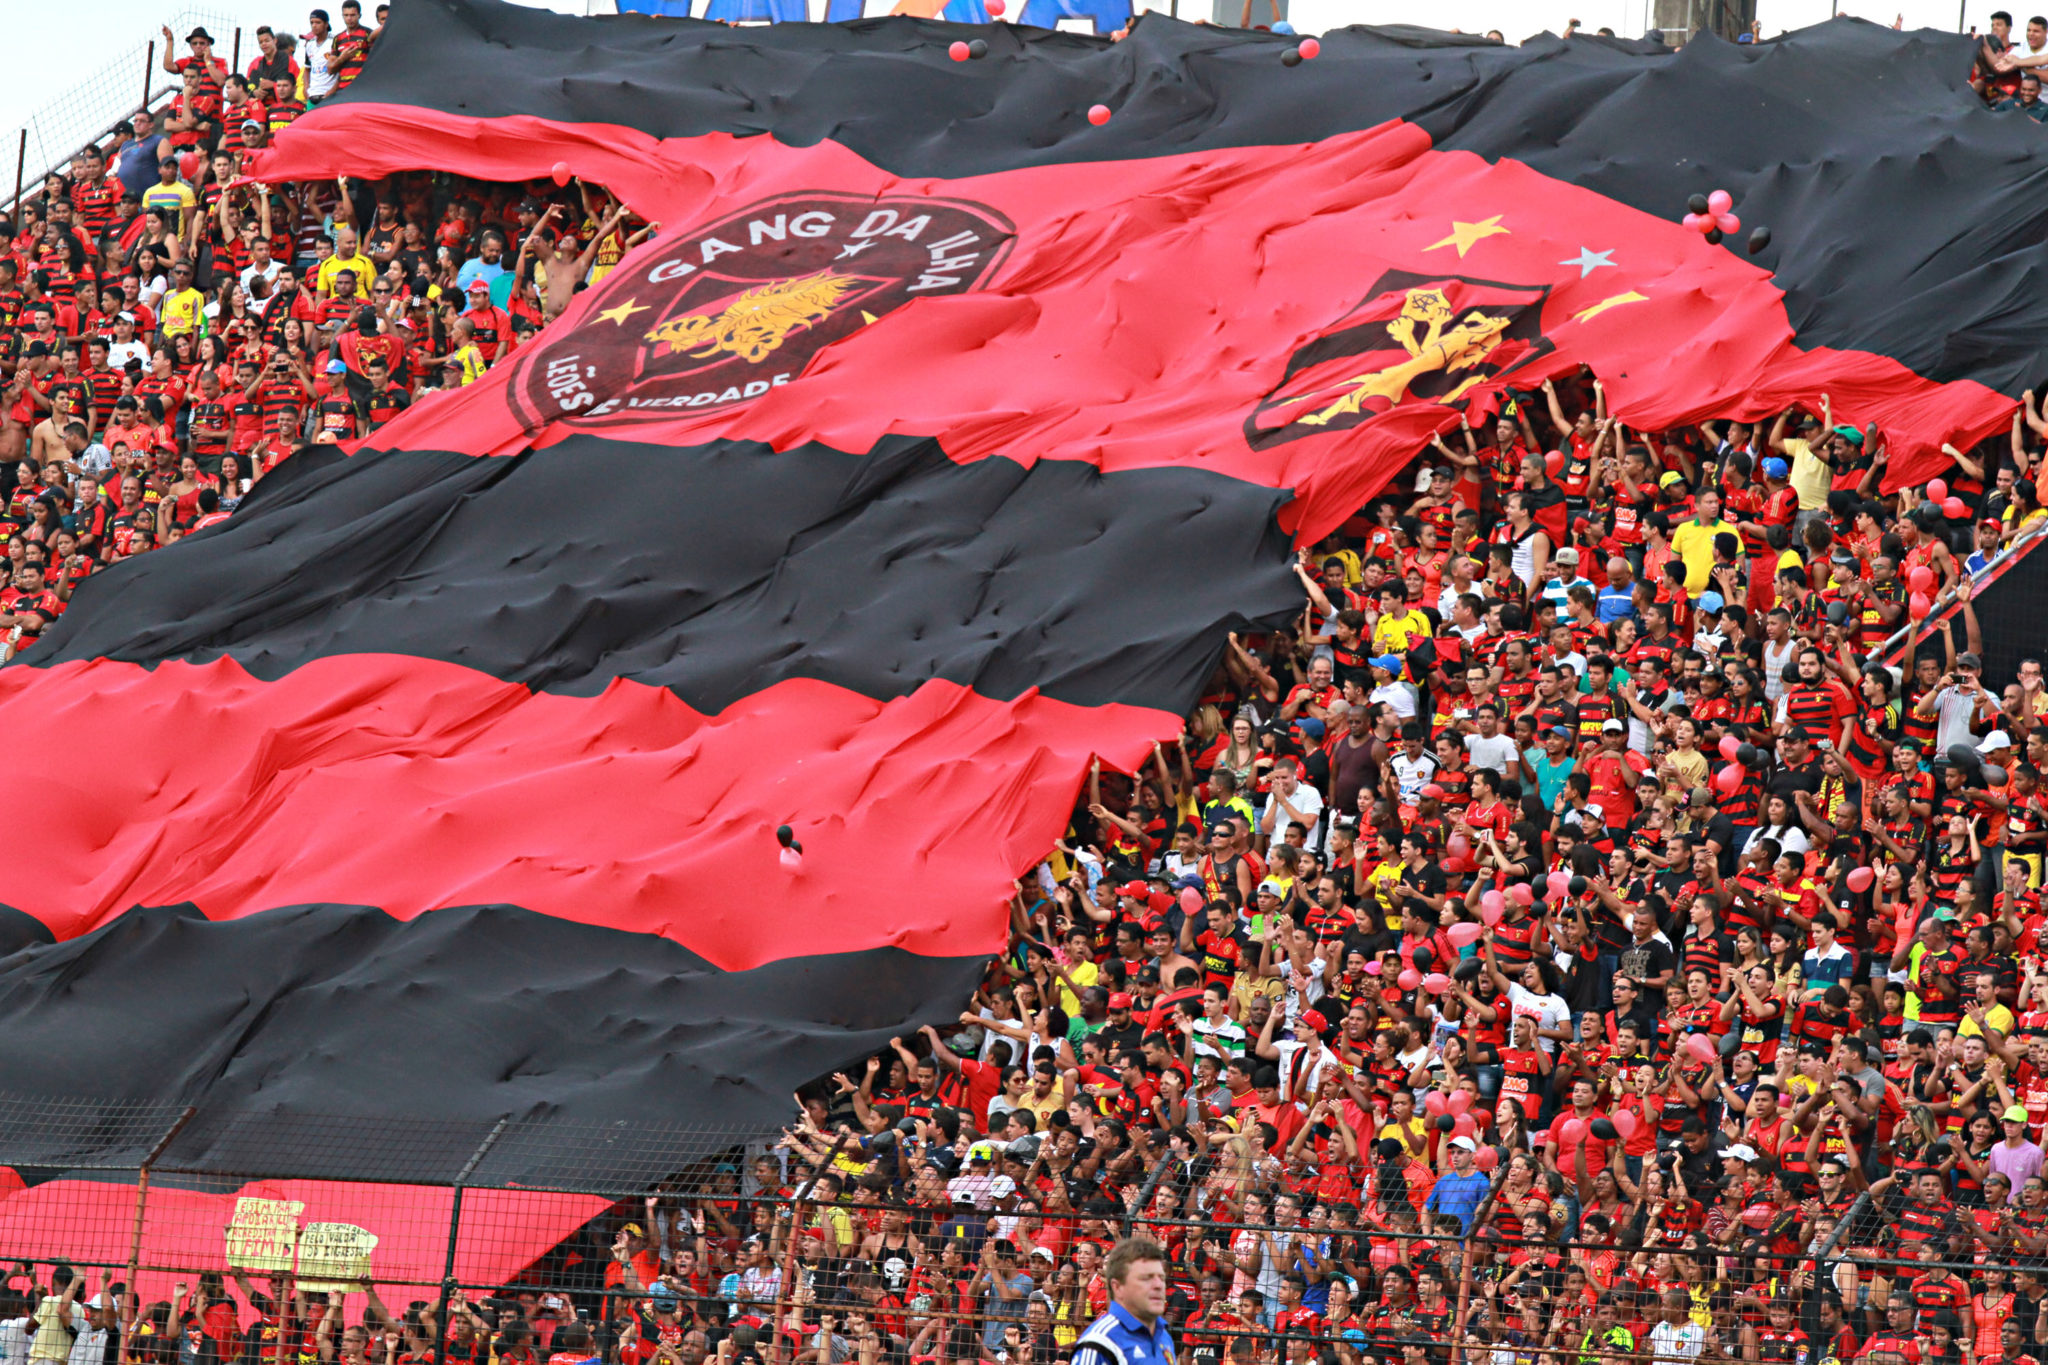 RECIFE, BRAZIL - NOVEMBER 2: Fans of Sport Recife cheer before a match between Sport Recife and Figueirense as part of Brasileirao Series A 2014 at Ilha do Retiro  Stadium on November 2, 2014 in Recife, Brazil. (Photo by Renato Spencer/Getty Images)